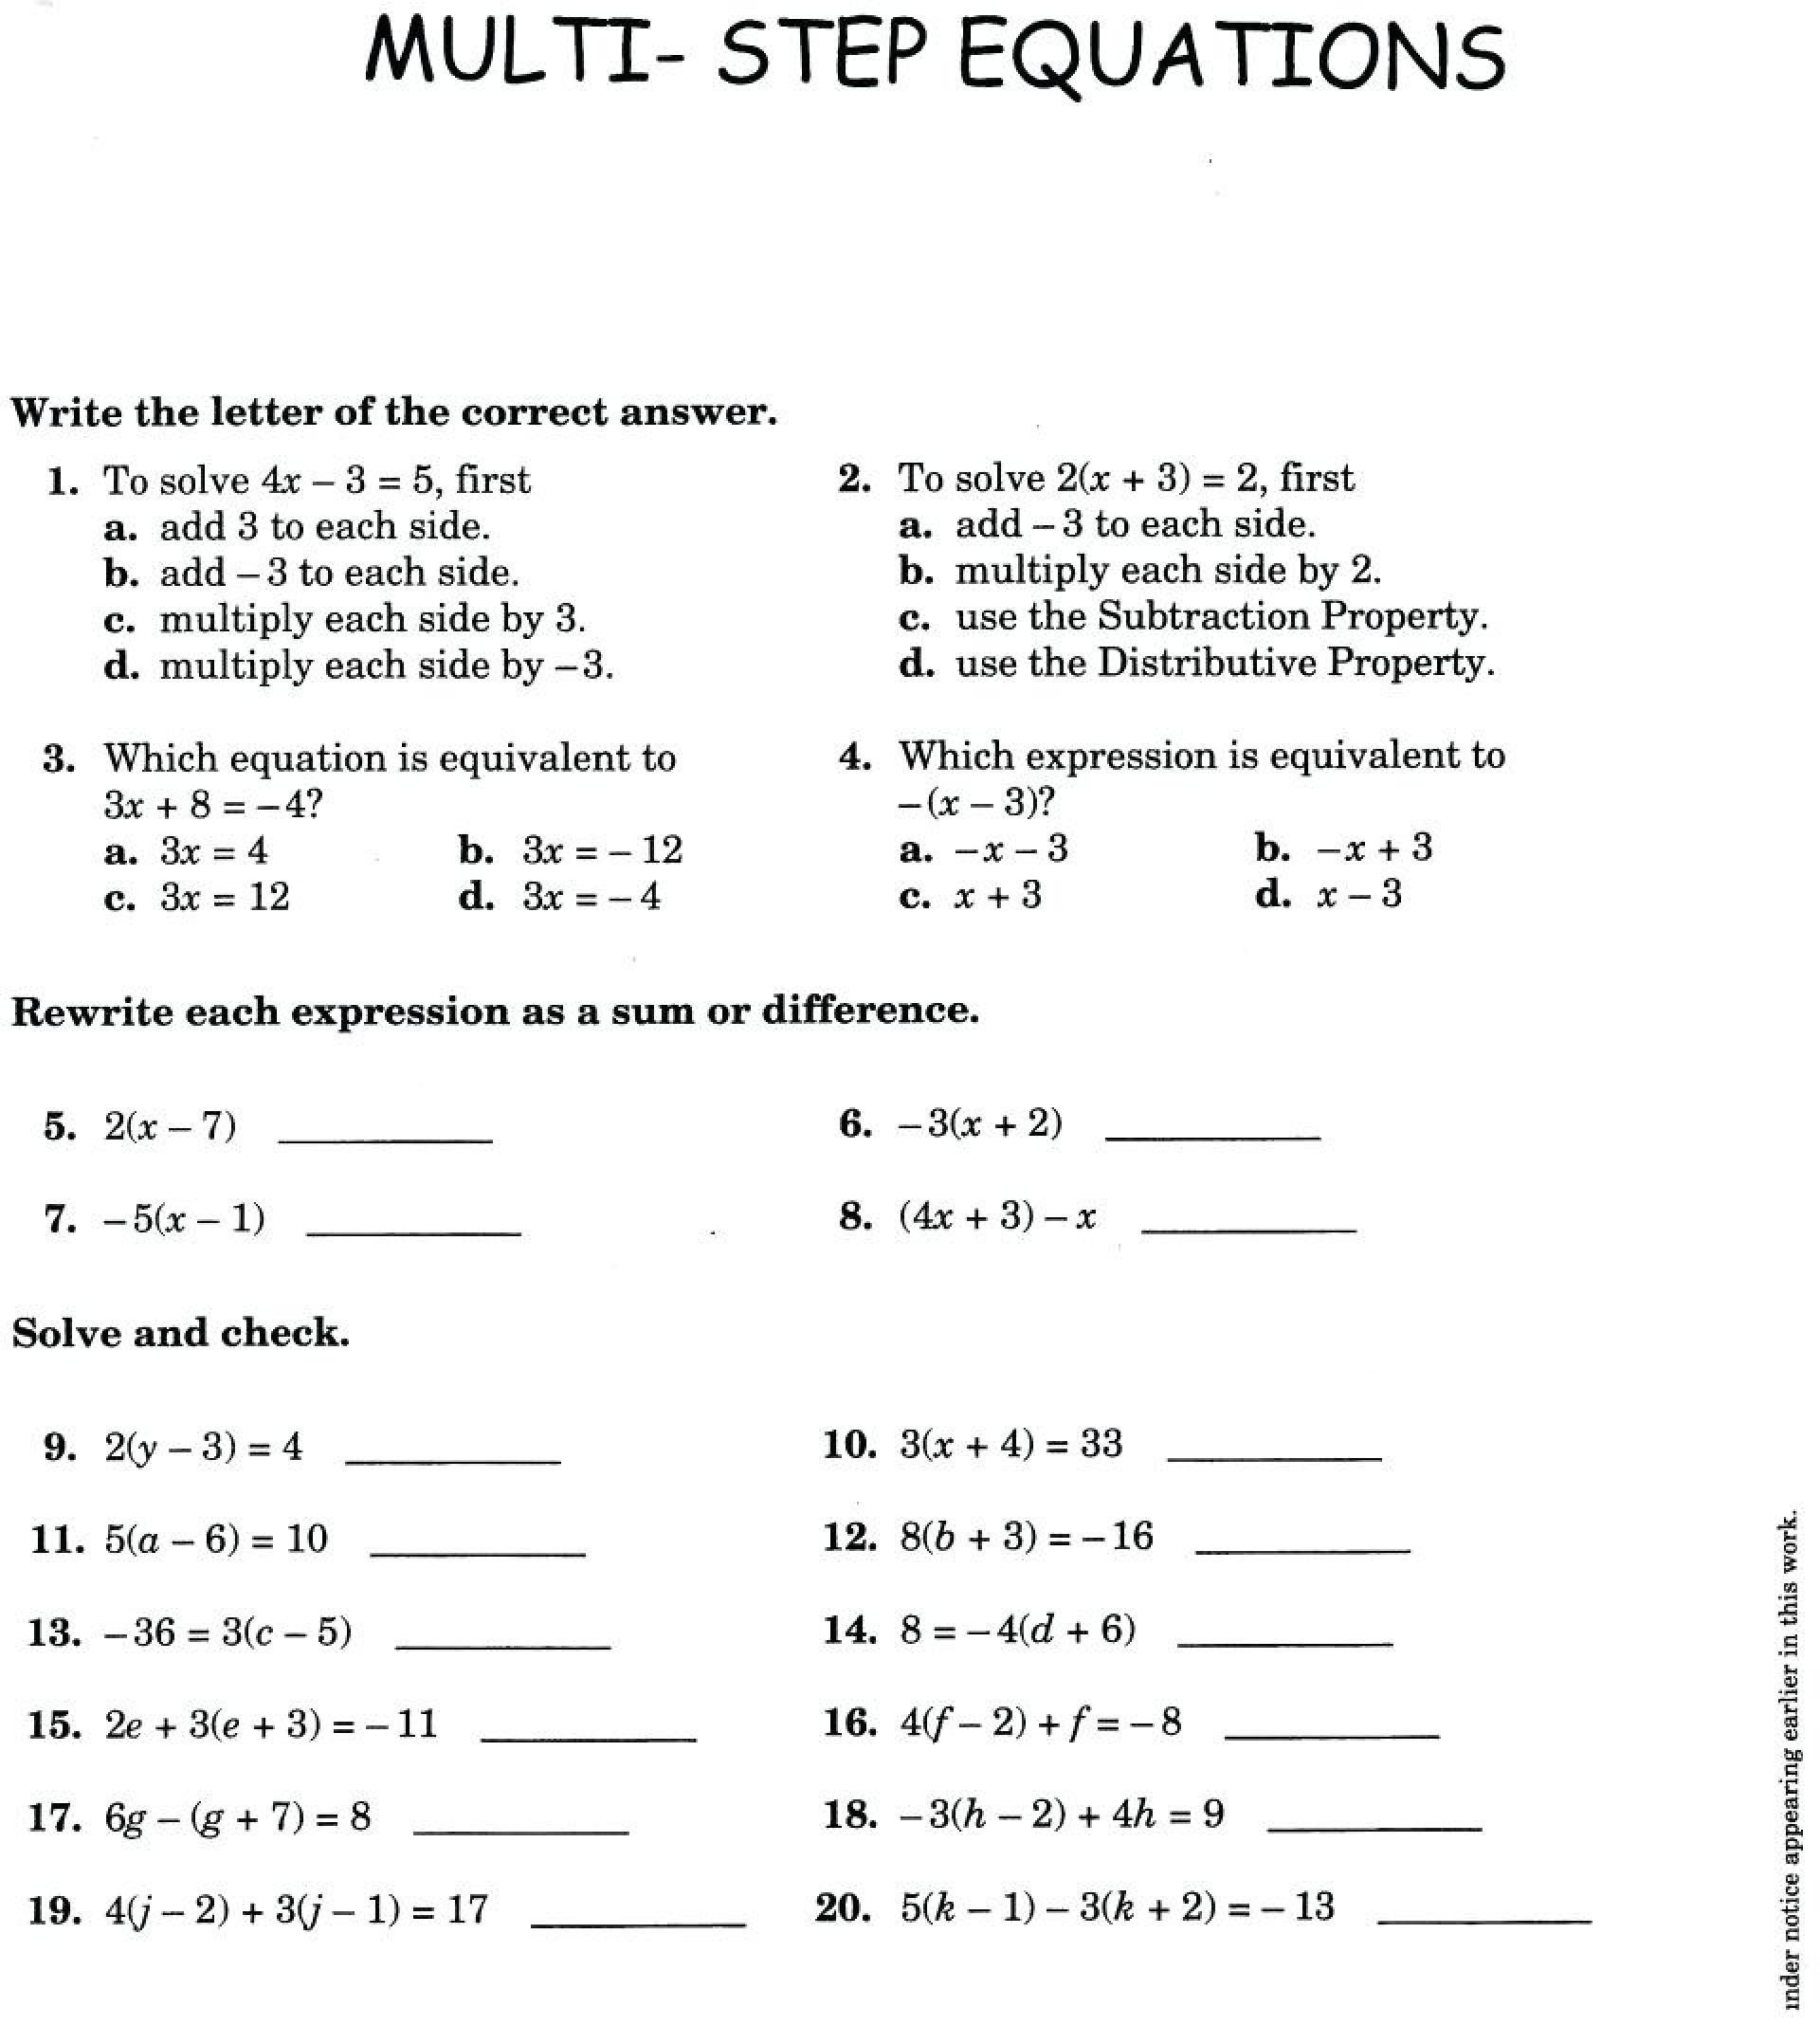 solving equations word problems activity